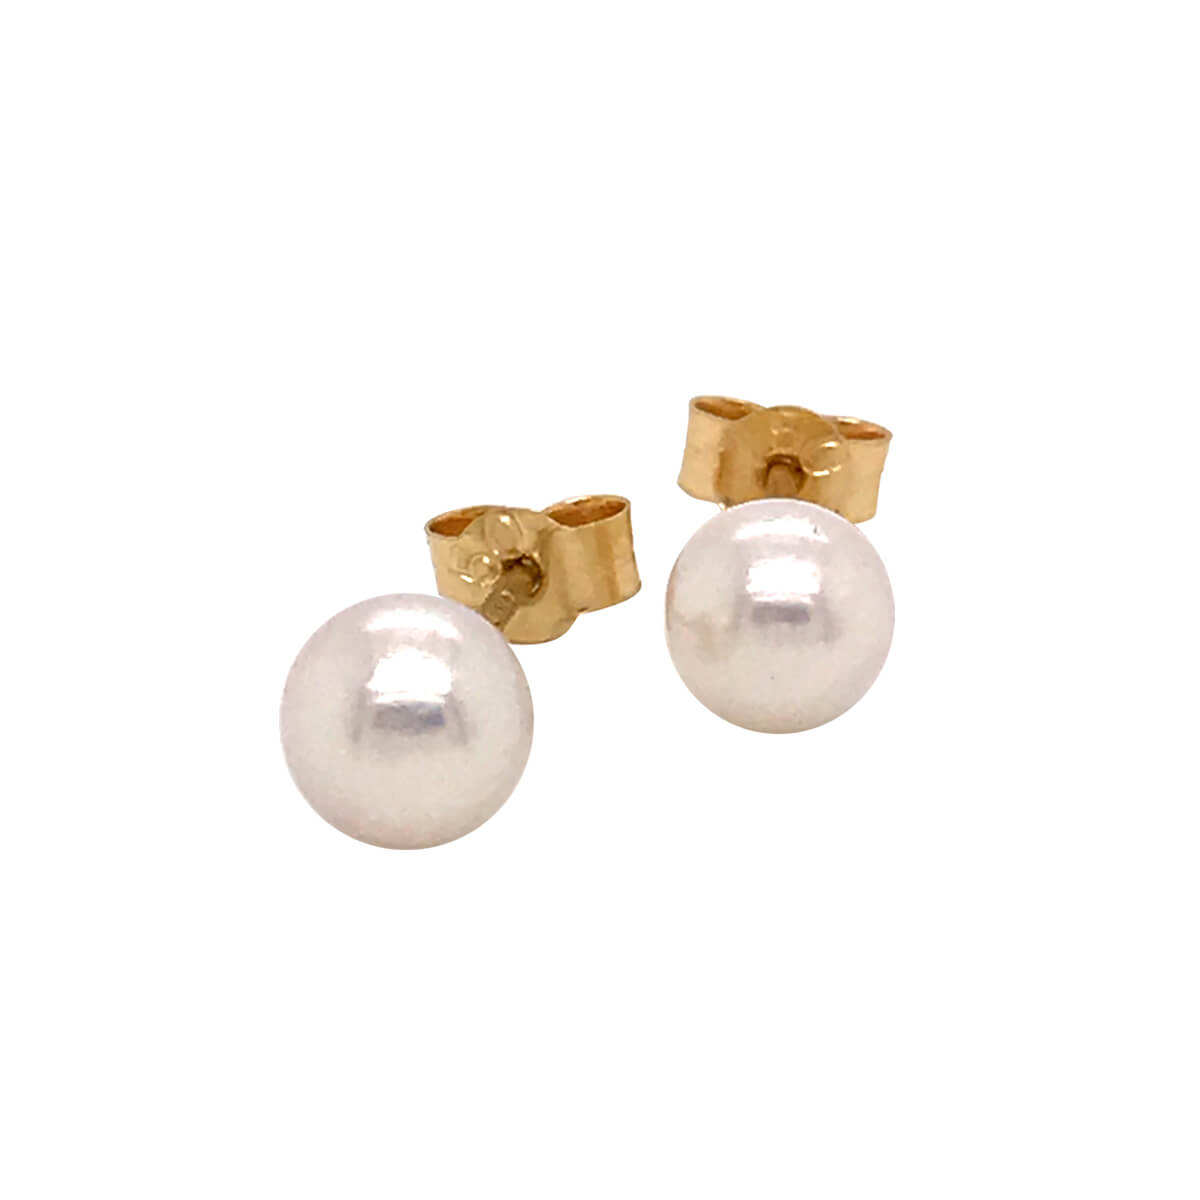 18ct Yellow Gold Cultured Pearl Stud Earrings 8.5mm x 9mm